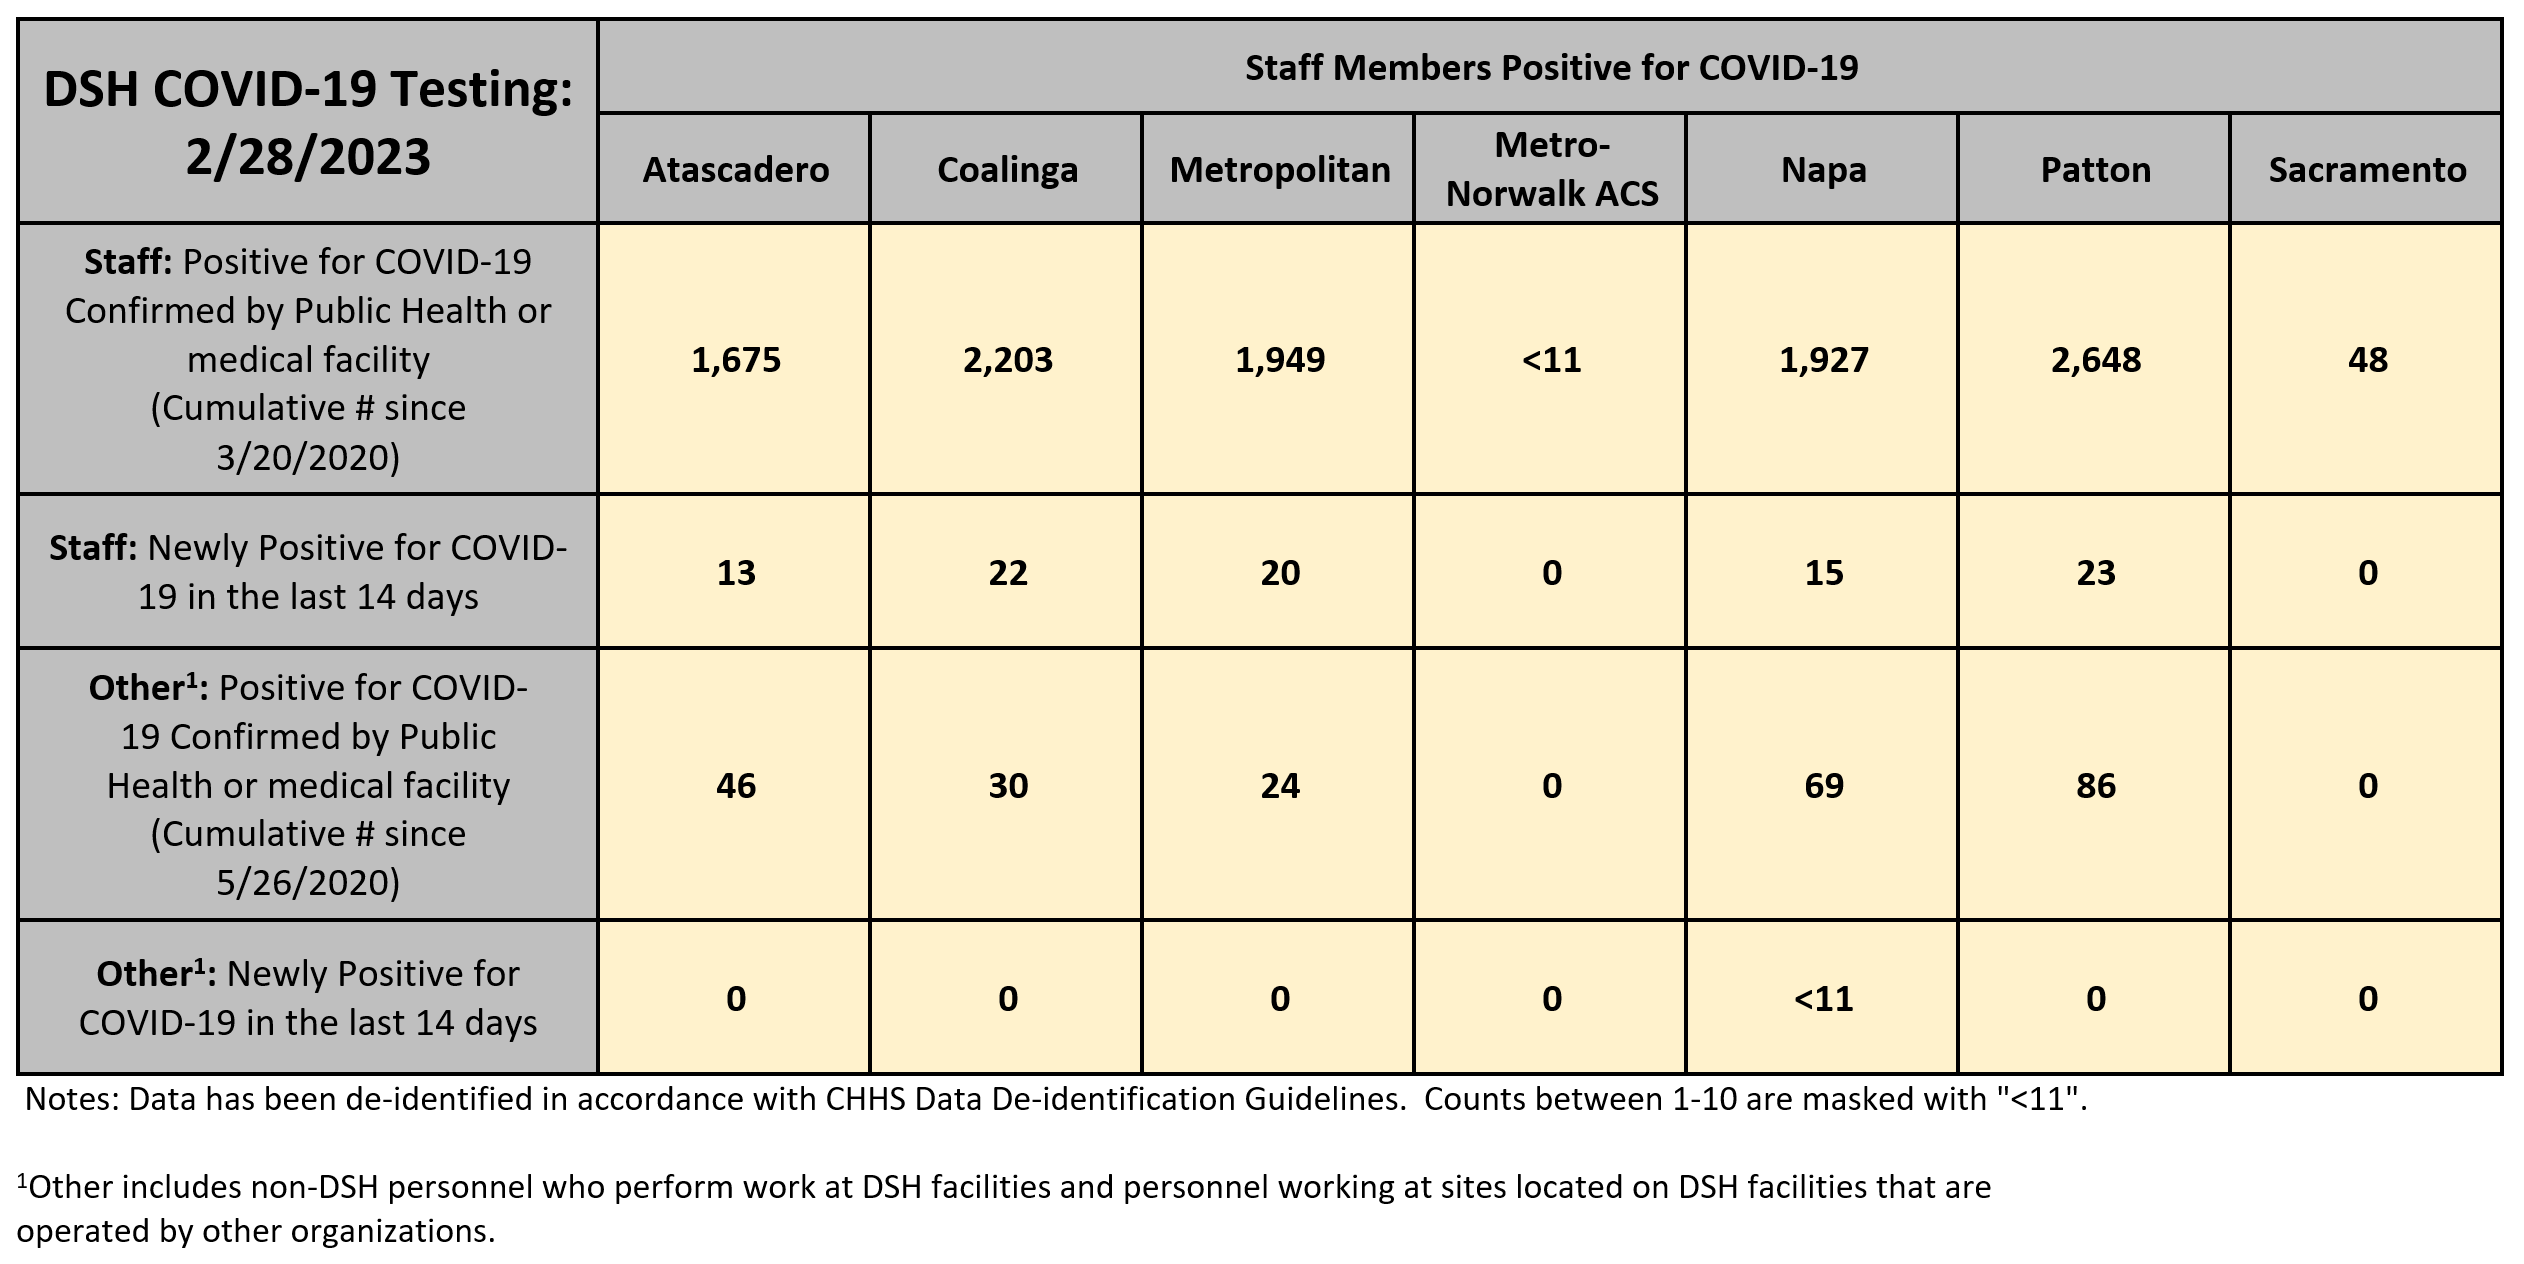 DSH COVID-19 Testing: As of 7/1/2022 – Staff Members Positive for COVID-19 - First Row: Staff: Positive for COVID-19 Confirmed by Public Health or medical facility (Cumulative Number since 3/20/2020): Atascadero: 1,127, Coalinga: 1,506, Metropolitan: 1,342, Metro-Norwalk ACS: Less than 11, Napa: 1,319, Patton: 1,732, Sacramento: 40 – Next Row: Staff: Newly Positive for COVID-19 in the last 14 days: Atascadero: 64, Coalinga: 49, Metropolitan: 59, Metro-Norwalk ACS: 0, Napa: 93, Patton: 52, Sacramento: Less than 11 – Next Row: Other: Positive for COVID-19 Confirmed by Public Health or medical facility (Cumulative Number since 5/26/2020)(Other includes non-DSH personnel who perform work at DSH facilities and personnel working at sites located on DSH facilities that are operated by other organizations). Atascadero: 24, Coalinga: 17, Metropolitan: 18, Metro-Norwalk ACS: 0, Napa: 47, Patton: 81, Sacramento: 0 – Next Row: Other: Newly Positive for COVID-19 in the last 14 days: Atascadero: Less than 11, Coalinga: Less than 11, Metropolitan: Less than 11, Metro-Norwalk ACS: 0, Napa: Less than 11, Patton: Less than 11, Sacramento: 0